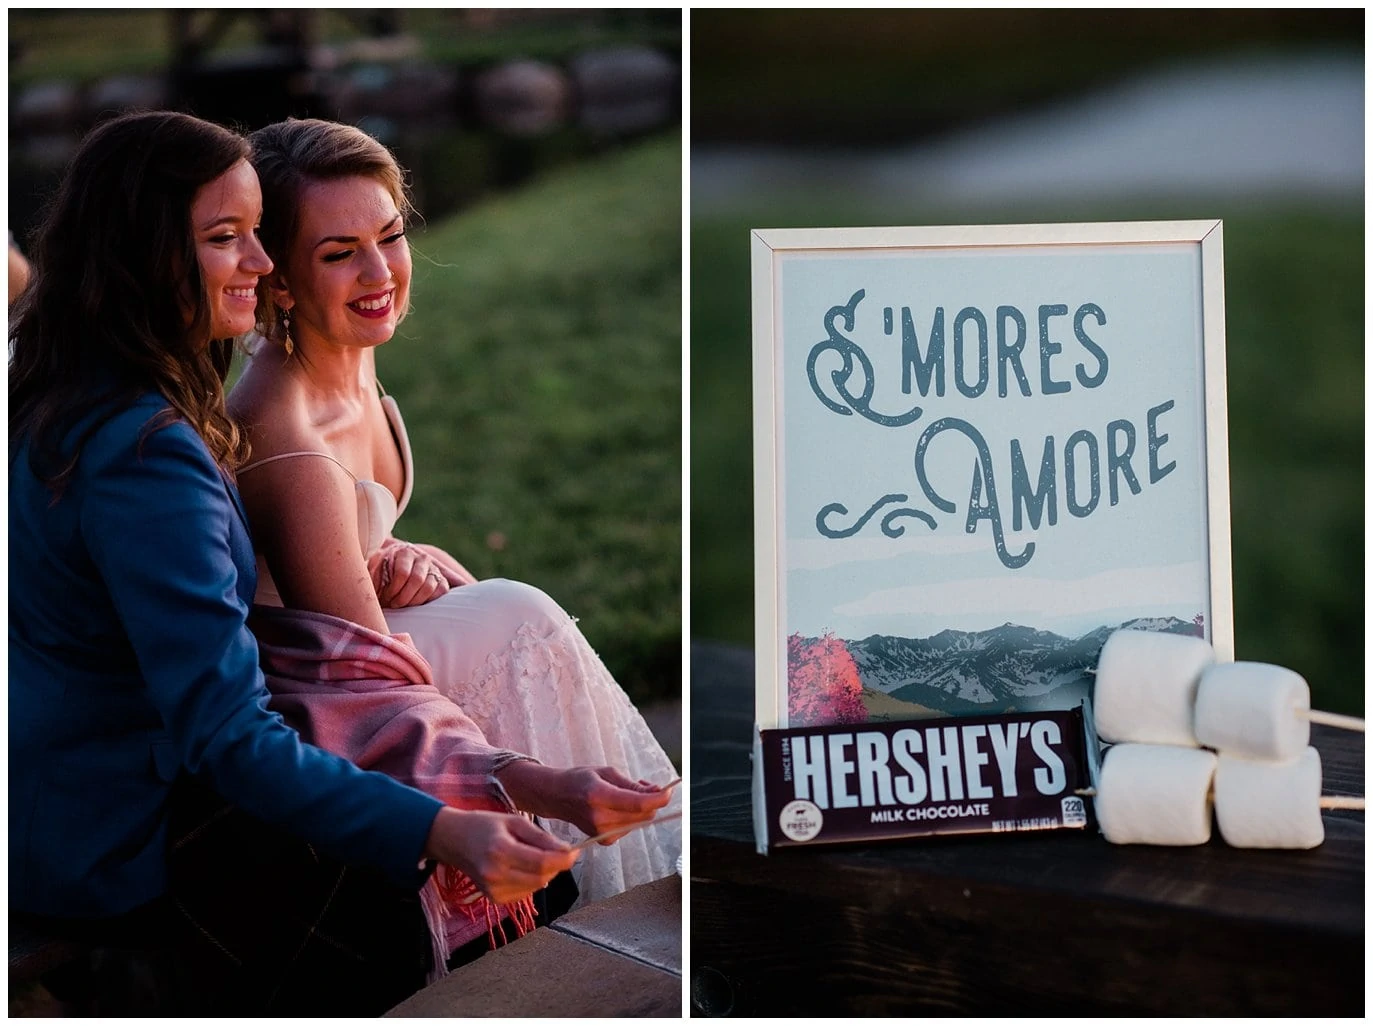 S'mores by firepit at wedding photo